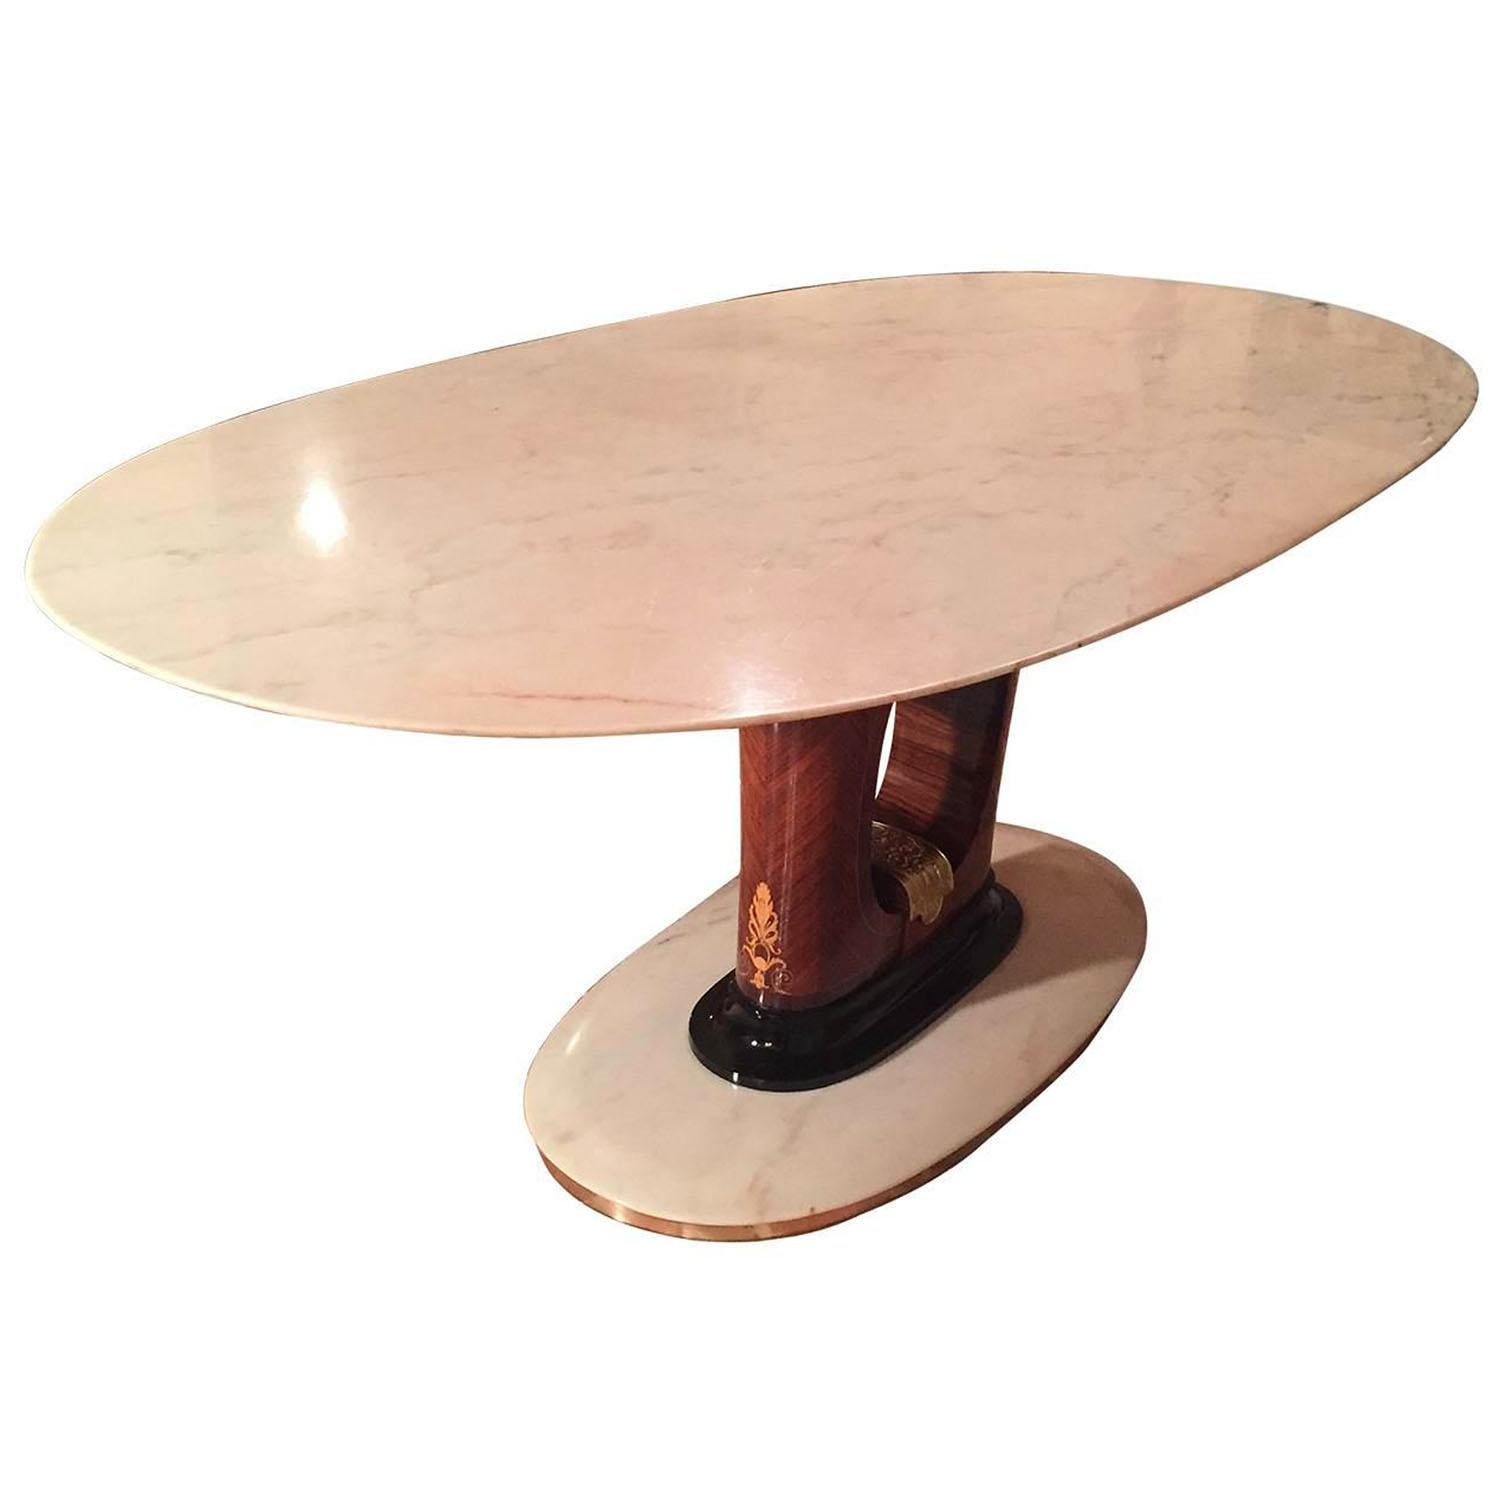 Luxurious Italian marble dining table, superb base line, Carrara marble, completely restored and ready to use.

We can manage the shipping over the world, packing the item with a customized wooden crate. This table will be shipped from Italy. Under